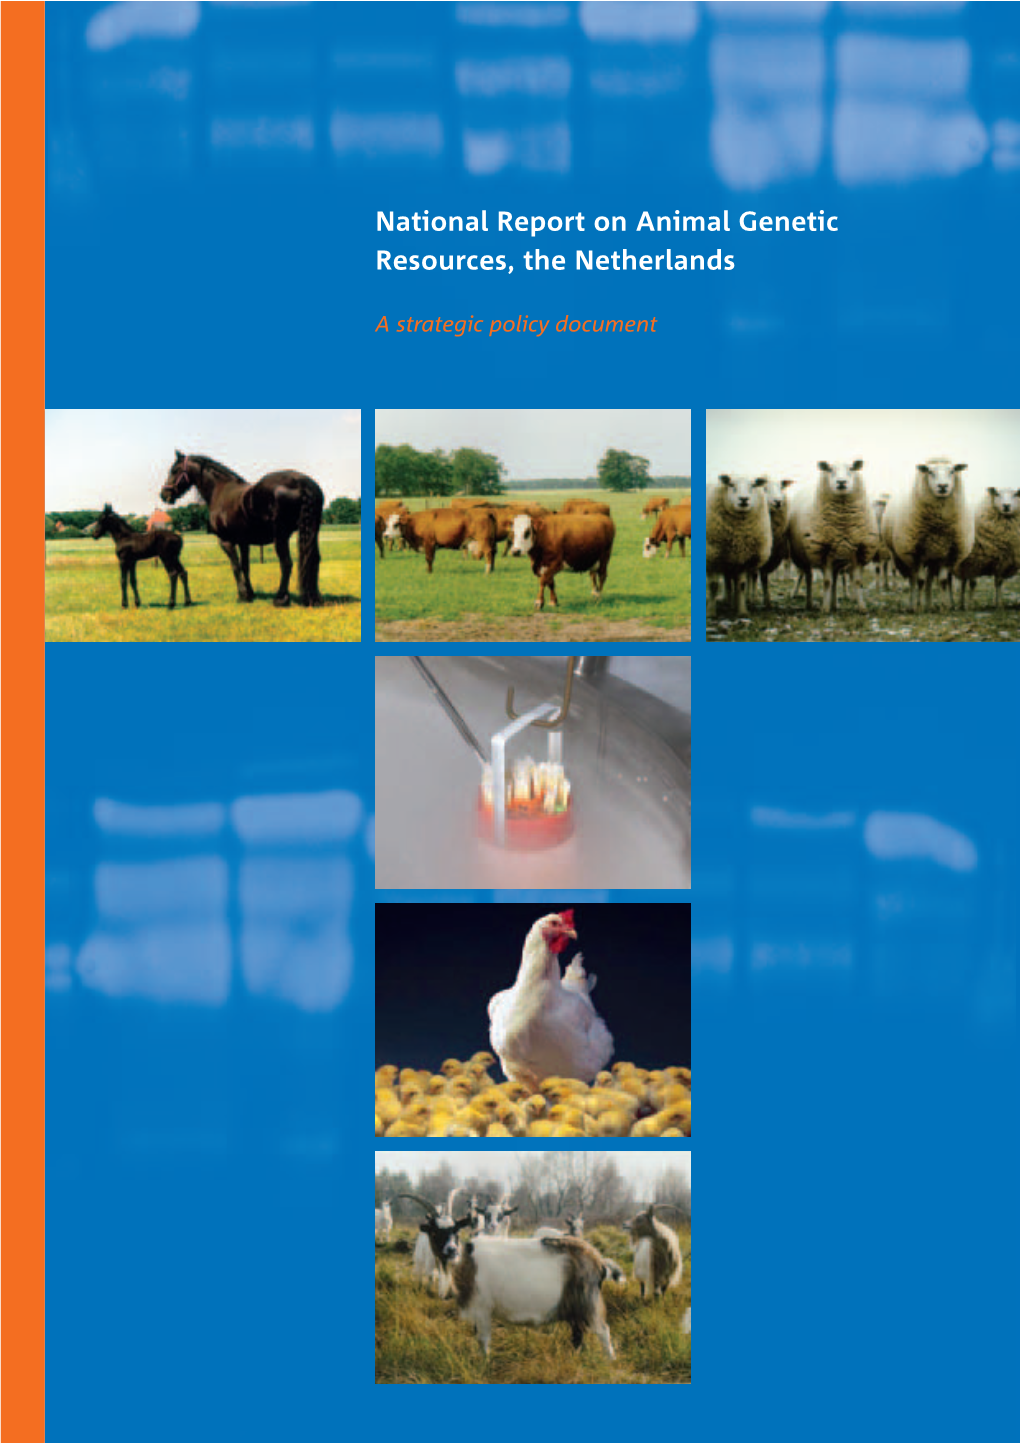 National Report on Animal Genetic Resources, the Netherlands